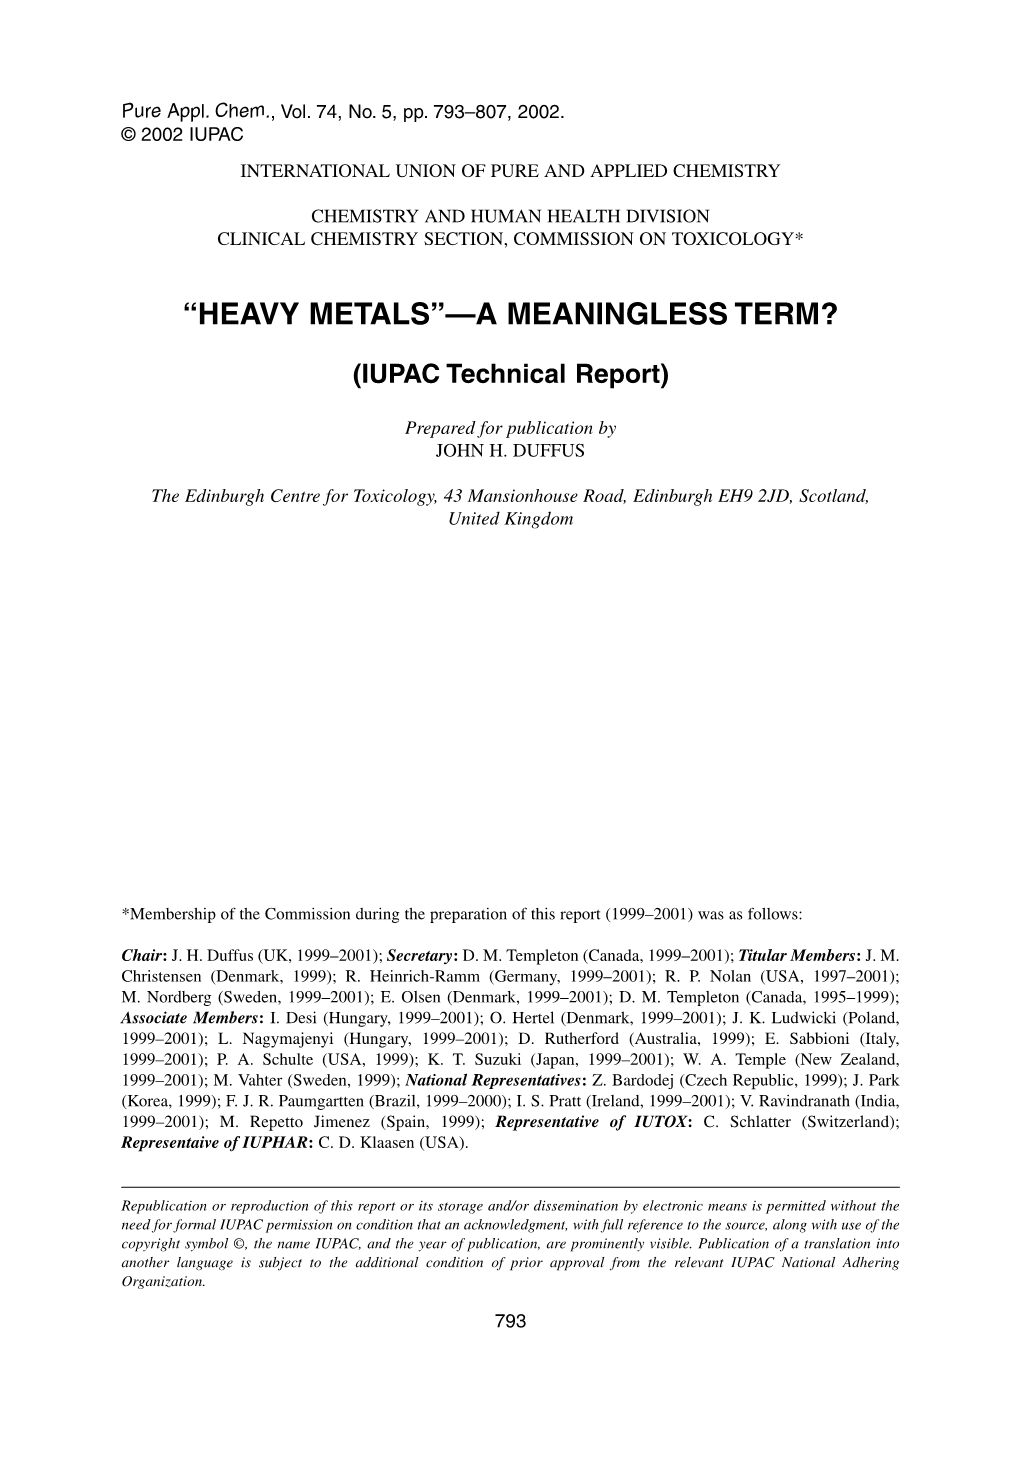 Heavy Metals”—A Meaningless Term?